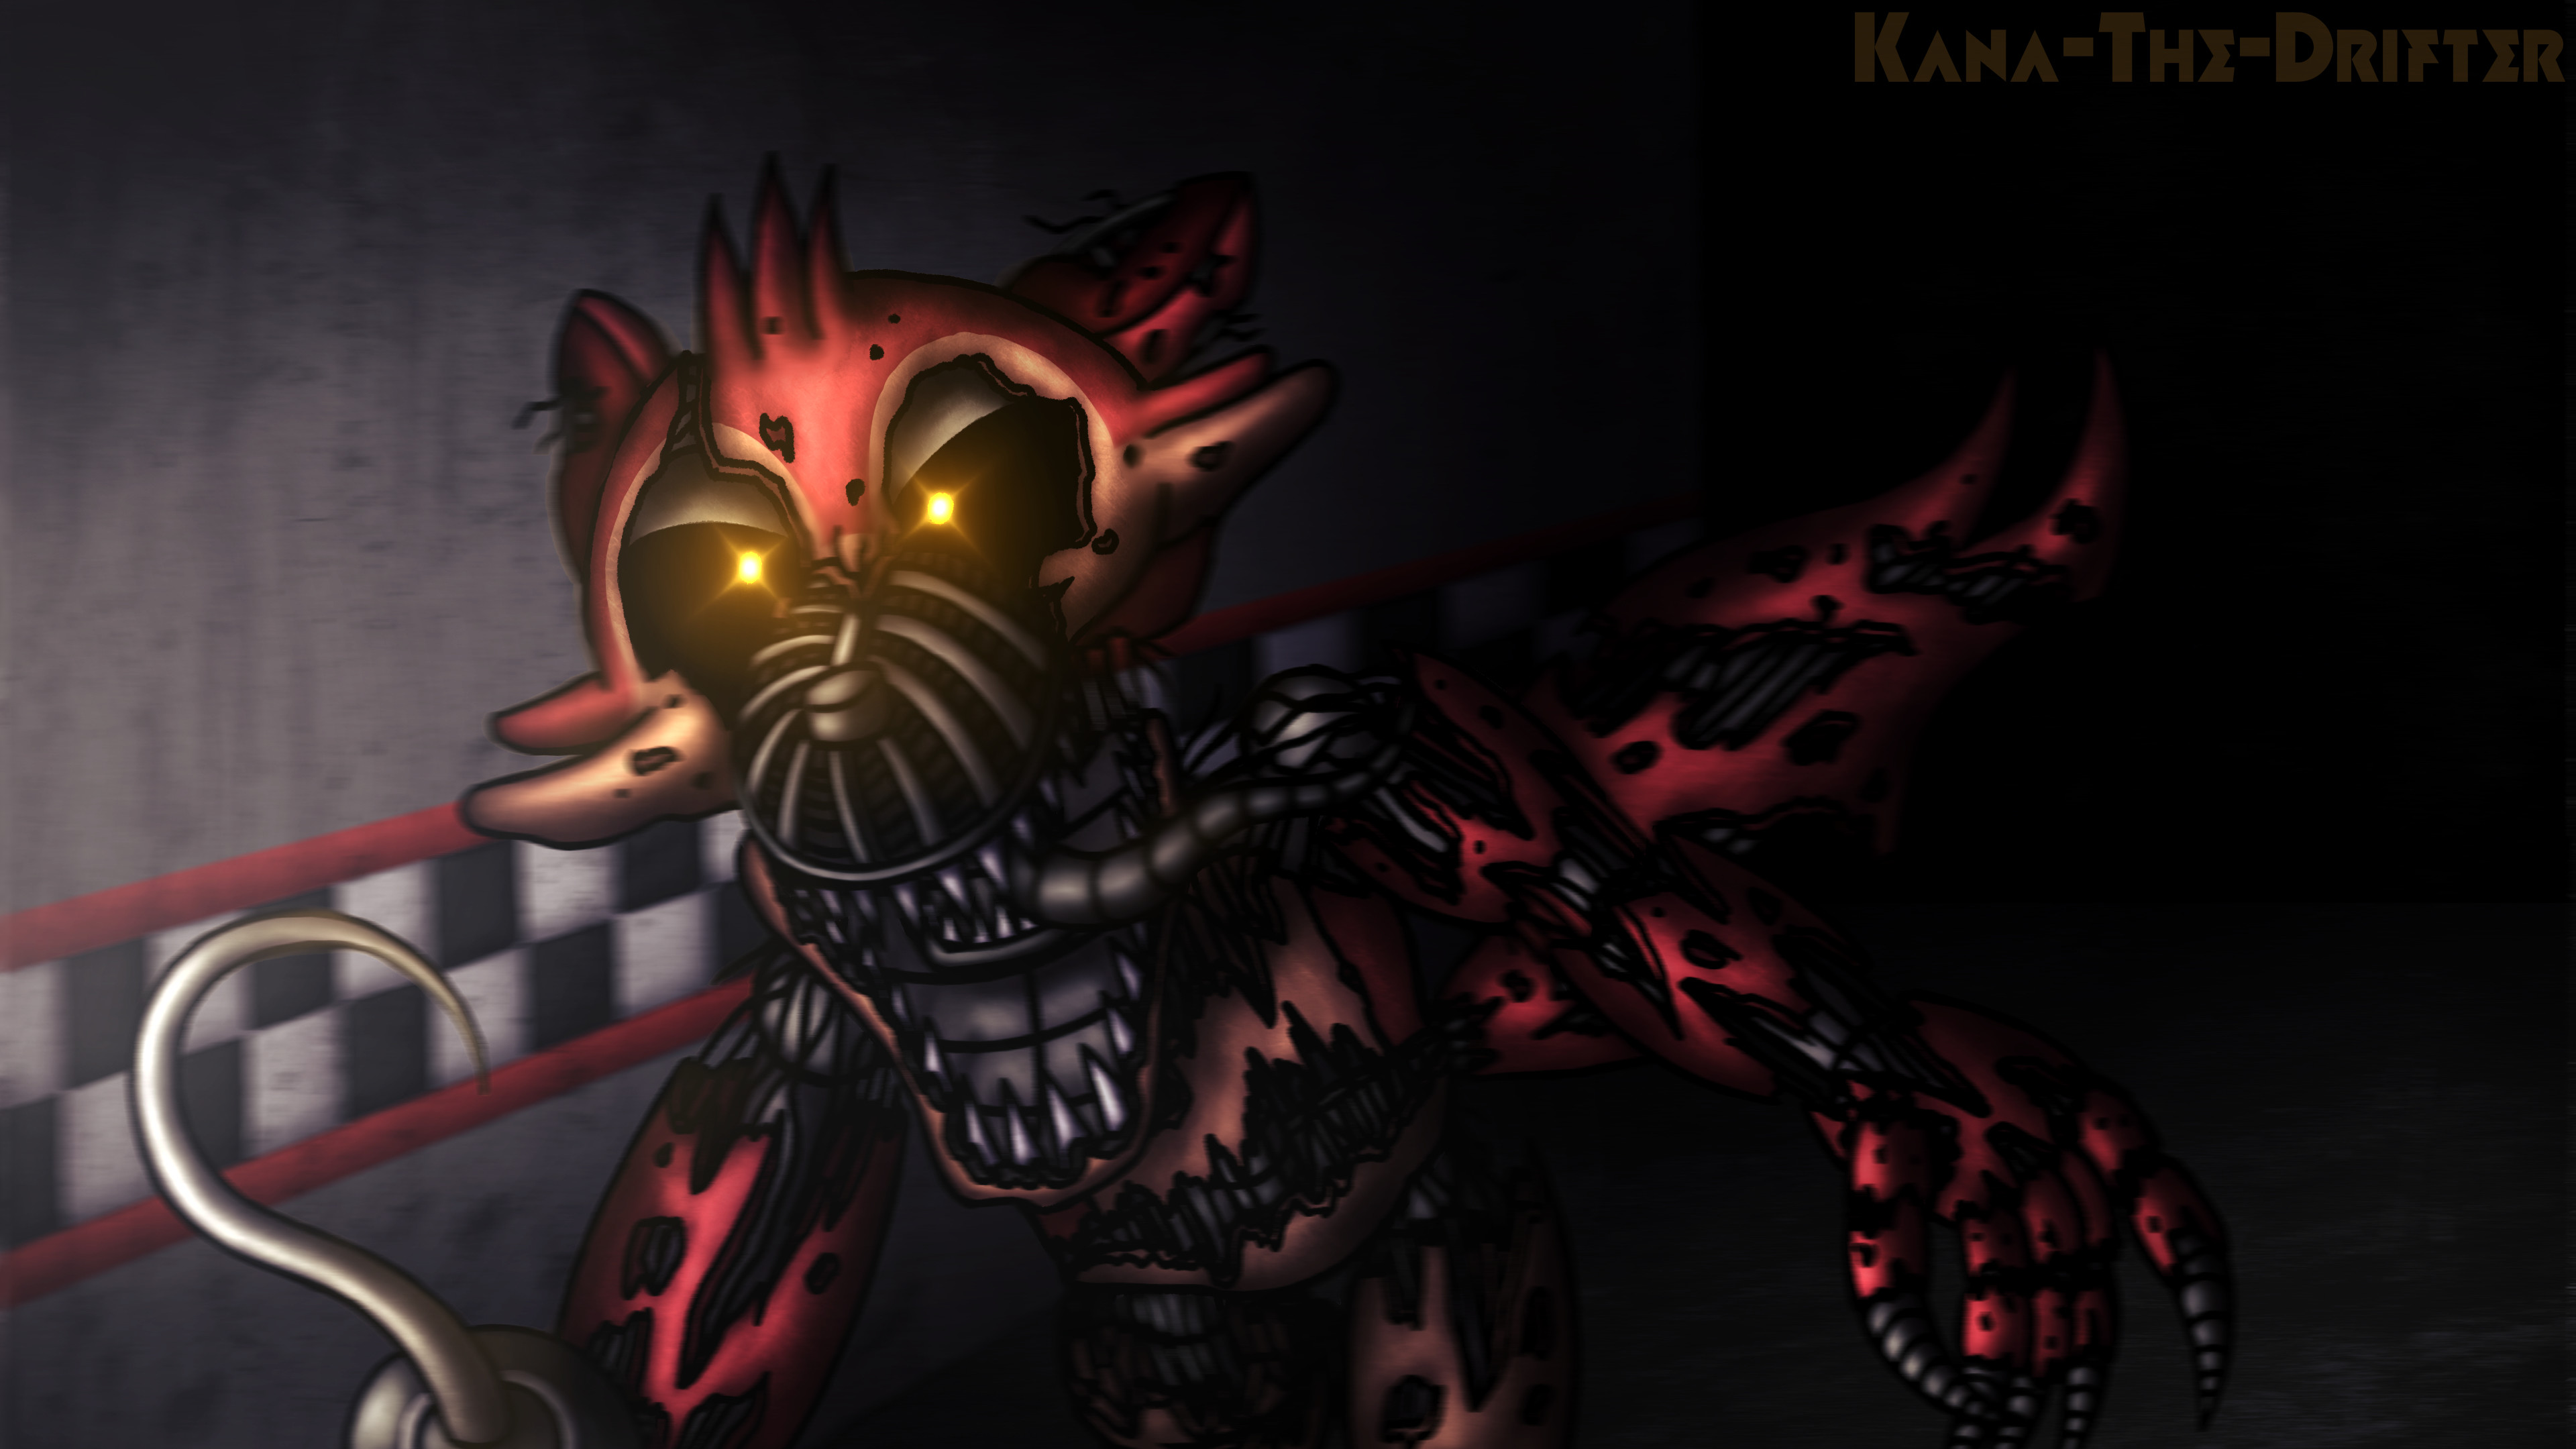 Dont Even Try To Escape 4K FnaF Wallpaper by Kana The